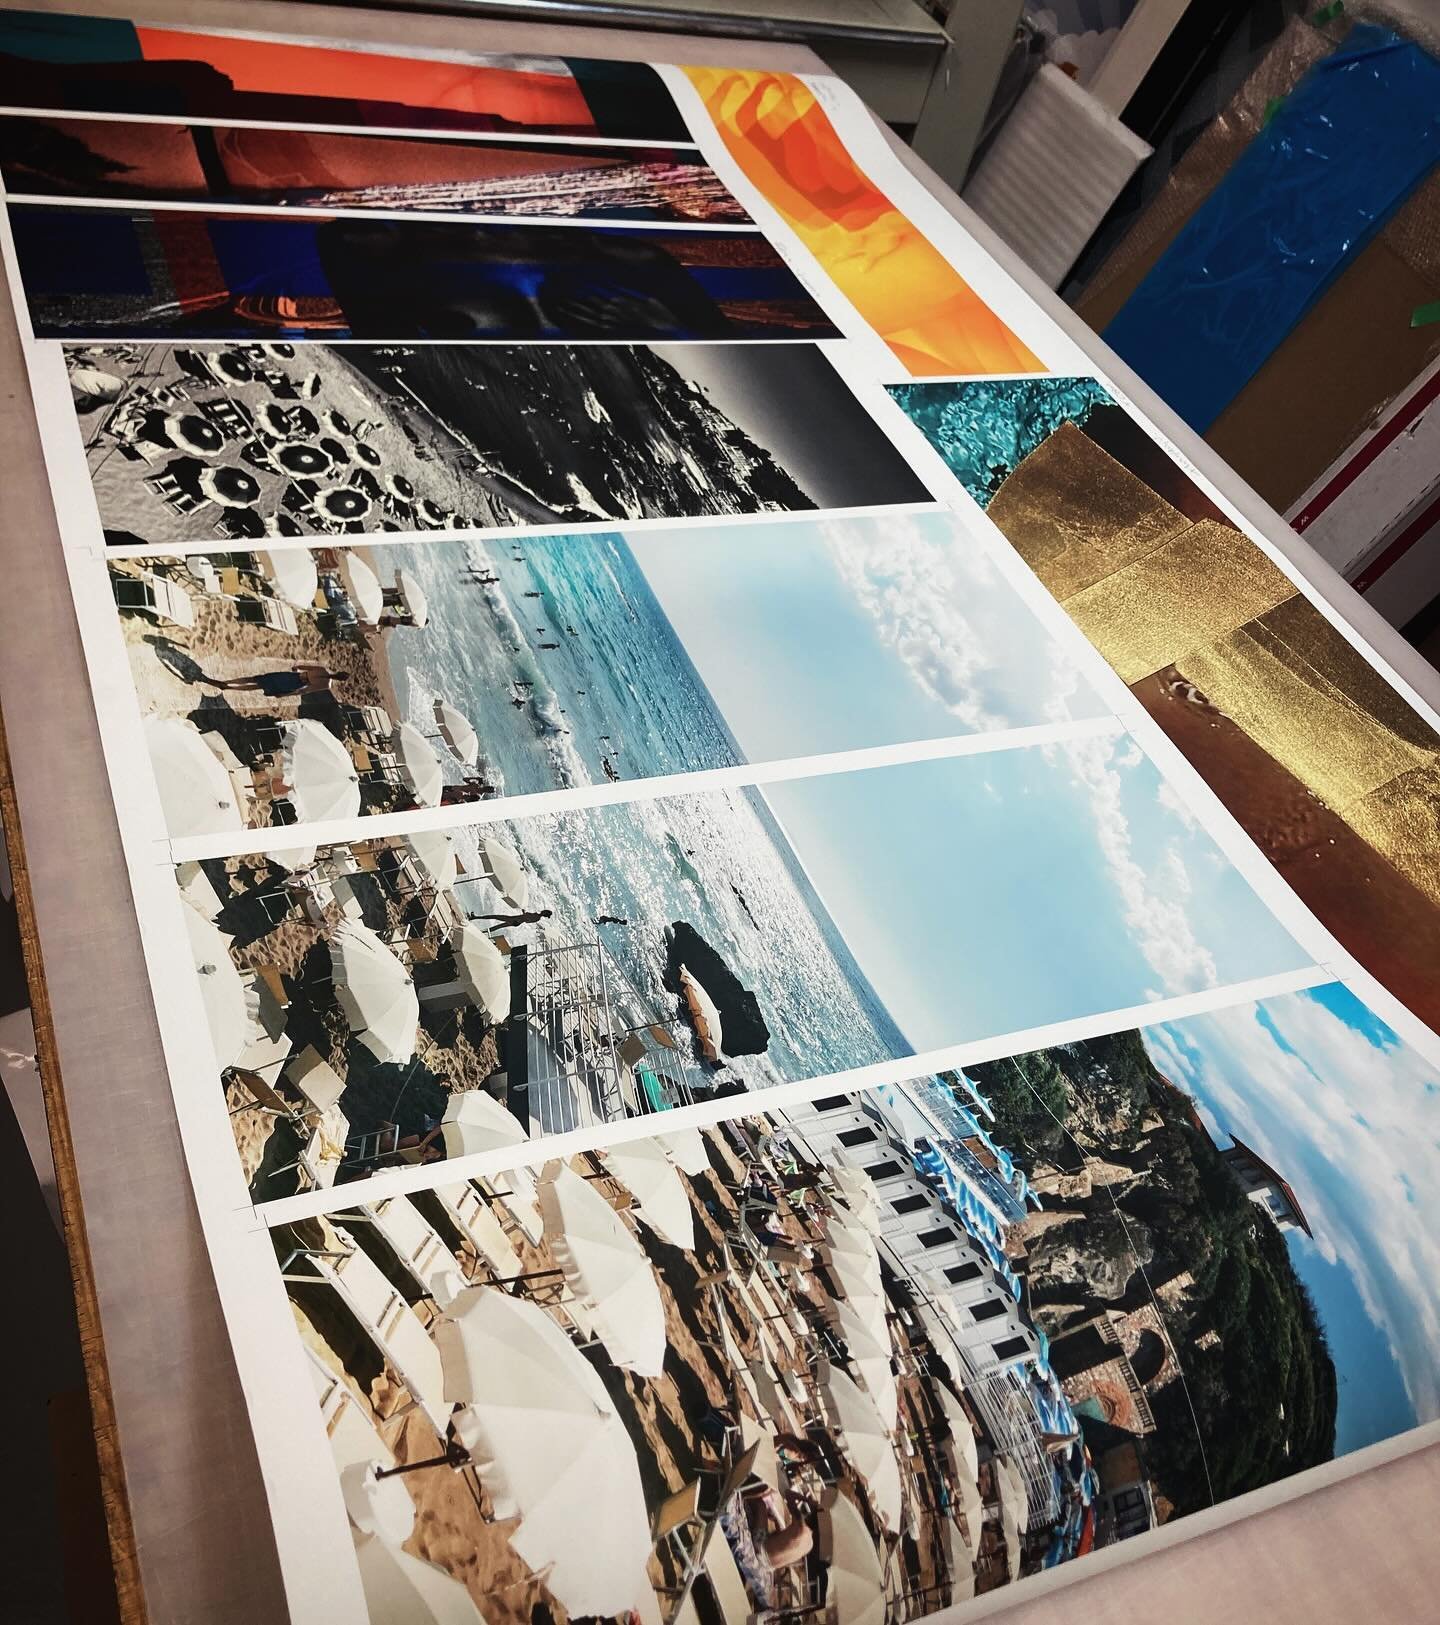 Sneak peek &hellip;.

Test prints look great and we are going to printing and framing now for my upcoming exhibition SUMMER DREAMS @berensonart 

Opening night on Thursday June 6th, 2024.
Mark it in your calender!

#innerkoflerprints #fineart #finear